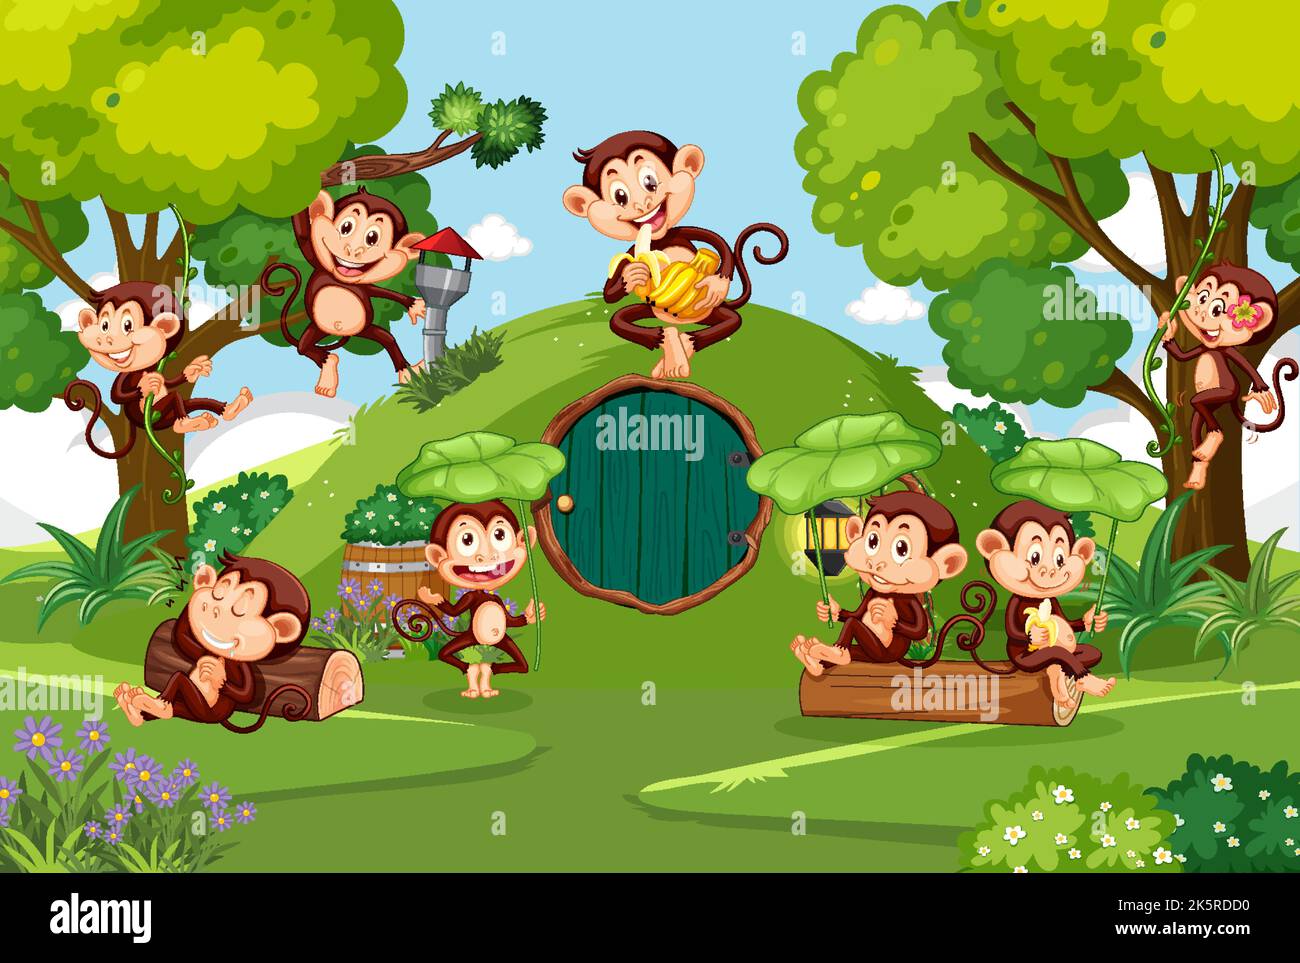 Happy monkey family in the forest illustration Stock Vector